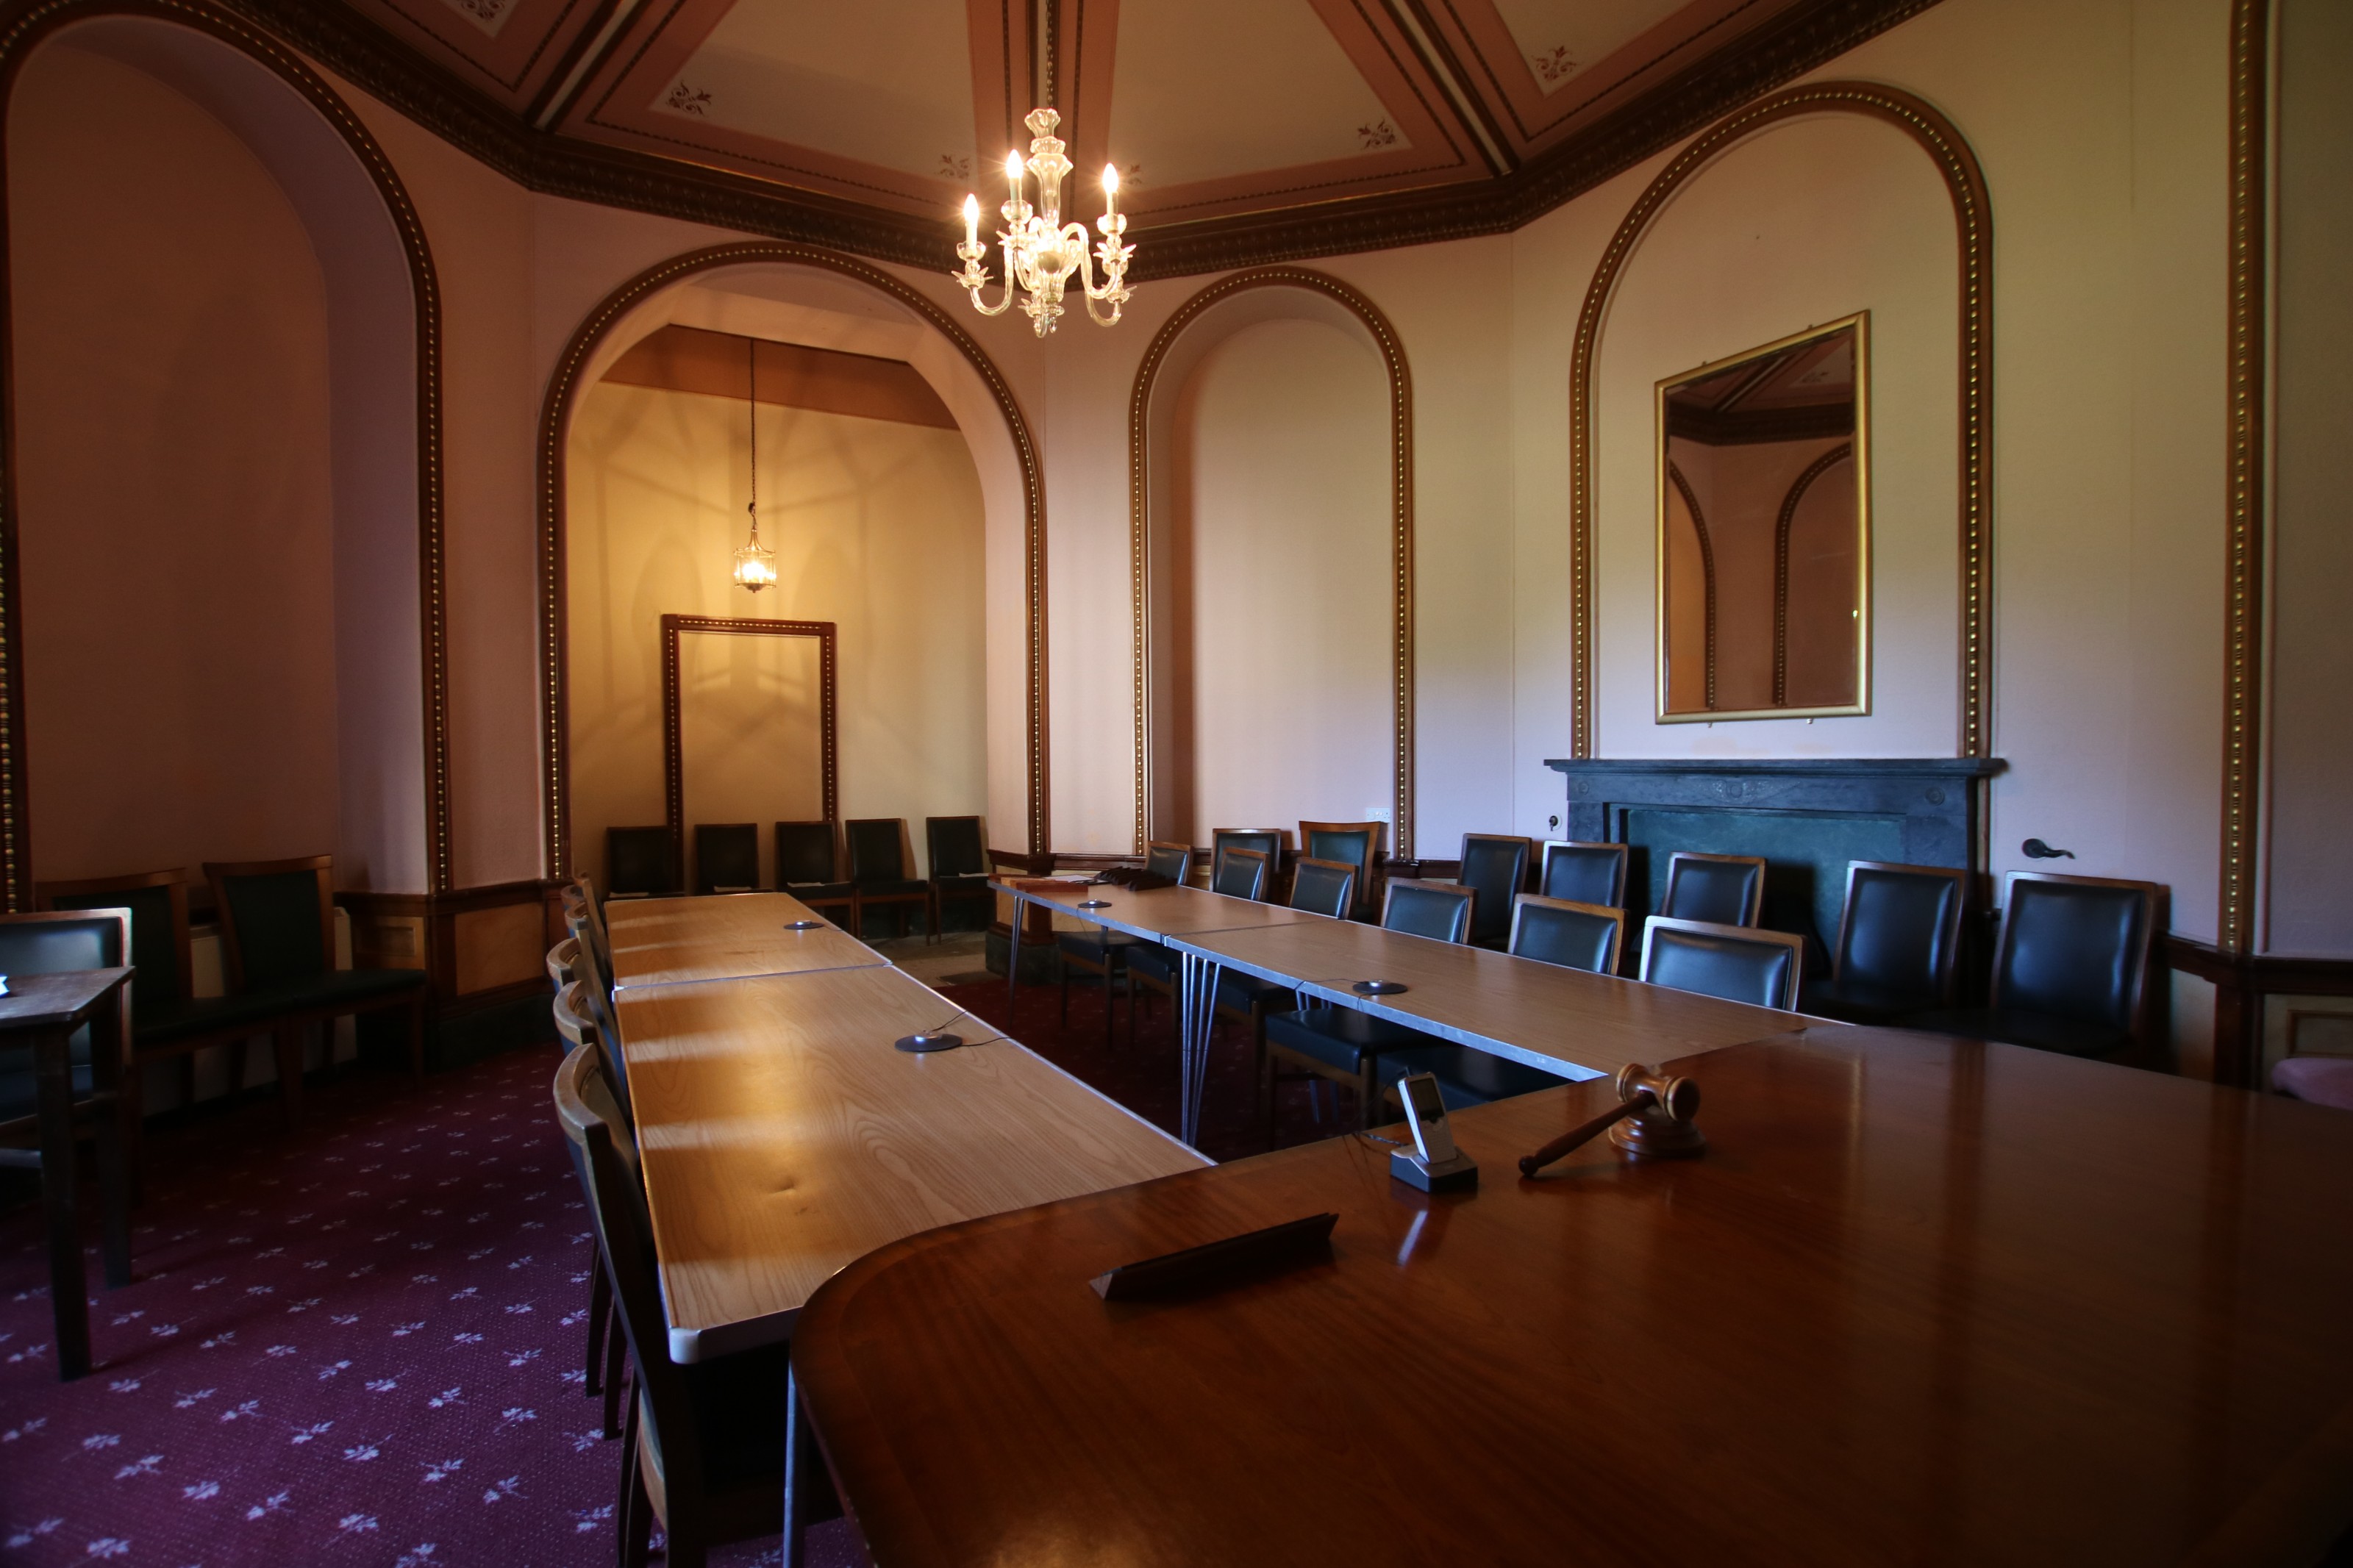 The Library meeting room boardroom style